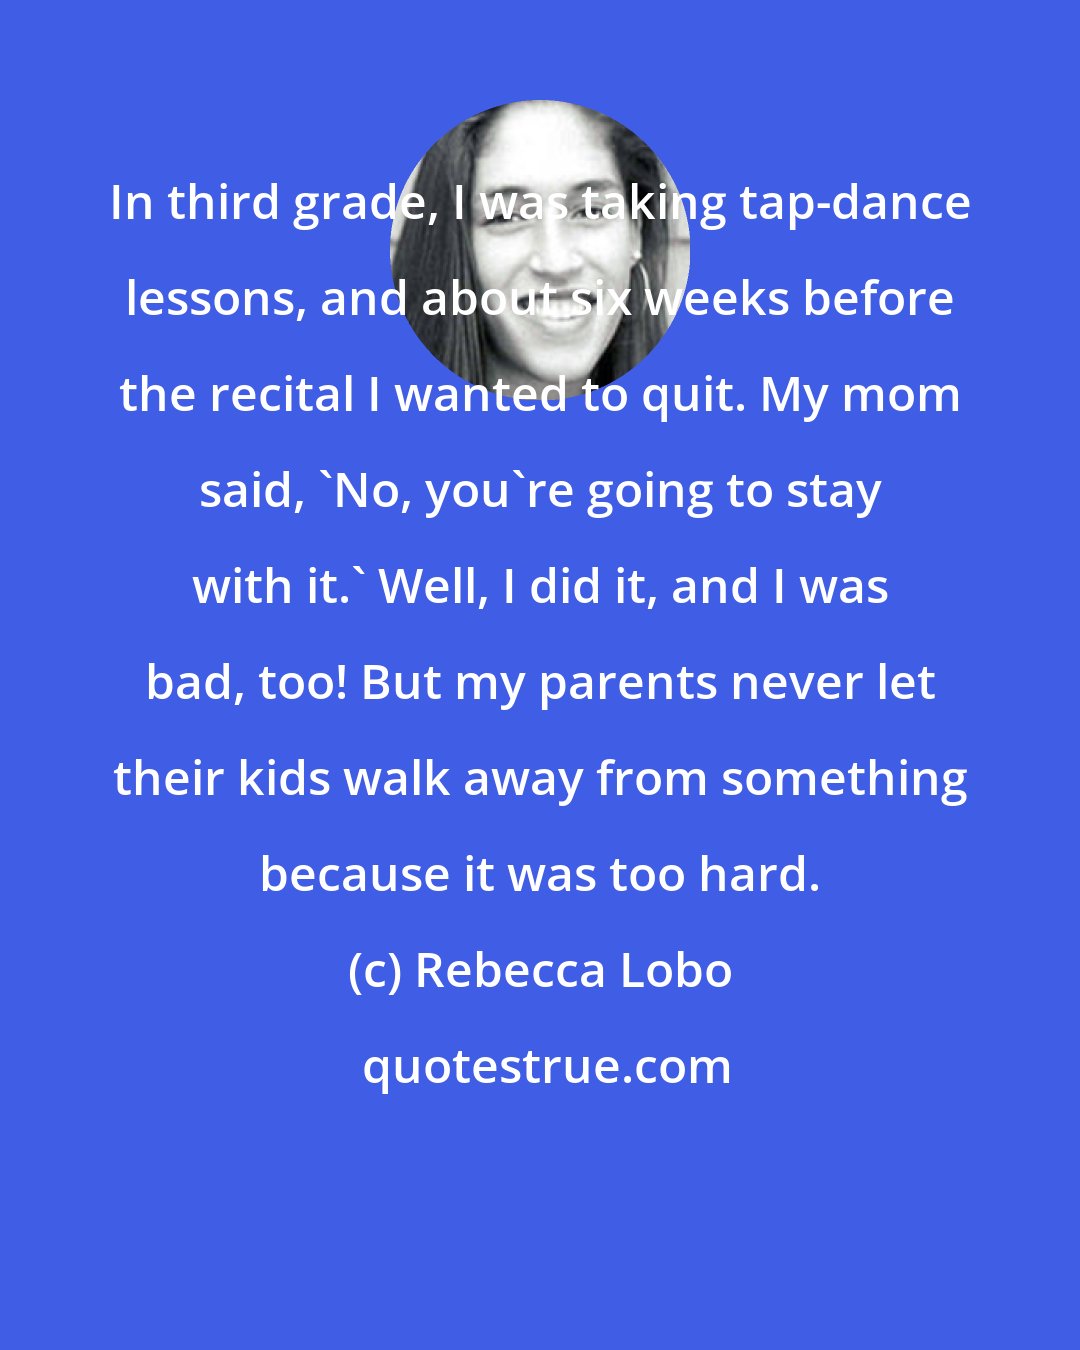 Rebecca Lobo: In third grade, I was taking tap-dance lessons, and about six weeks before the recital I wanted to quit. My mom said, 'No, you're going to stay with it.' Well, I did it, and I was bad, too! But my parents never let their kids walk away from something because it was too hard.